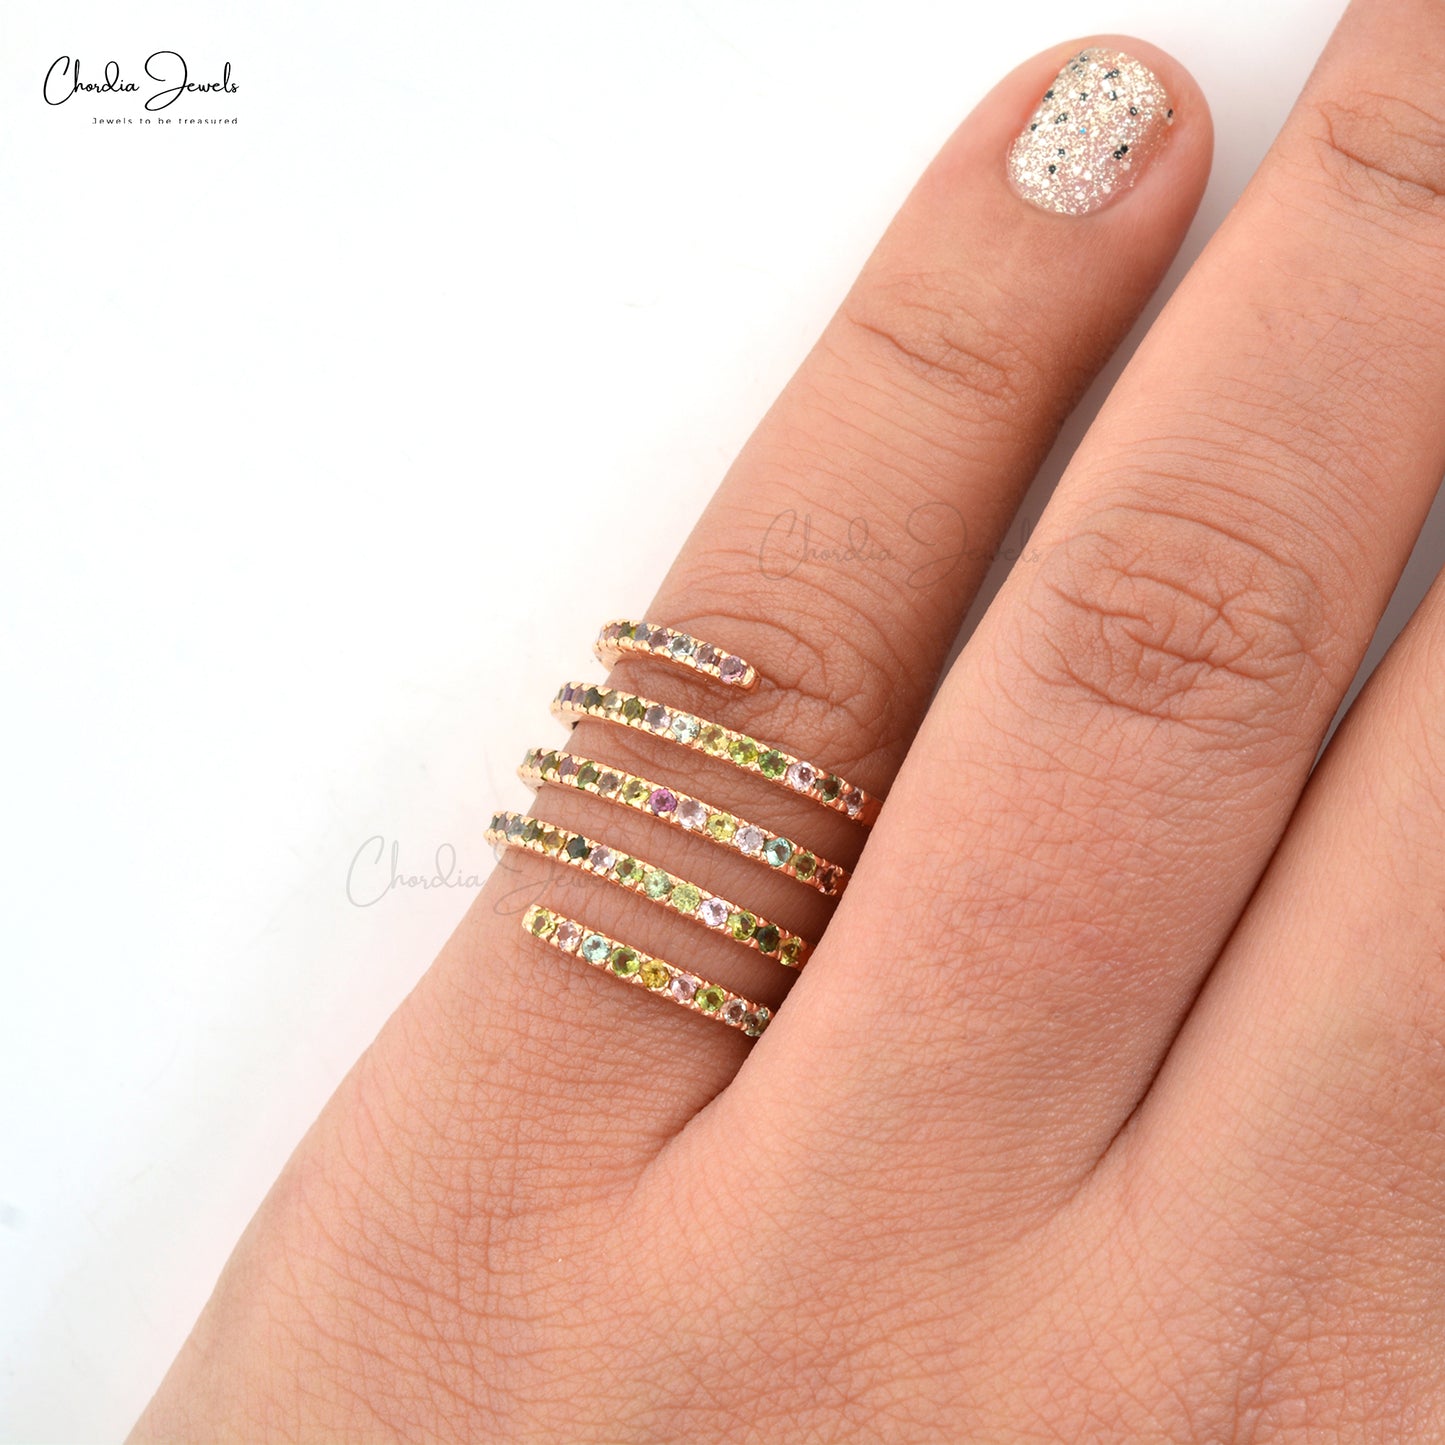 In LOVE with this 18k c1960 spiral ring set with 1/3ctw sparkly diamonds!  (Size 6.5, can't … | Gold rings jewelry, Gold ring designs, Fashion jewelry  necklaces gold